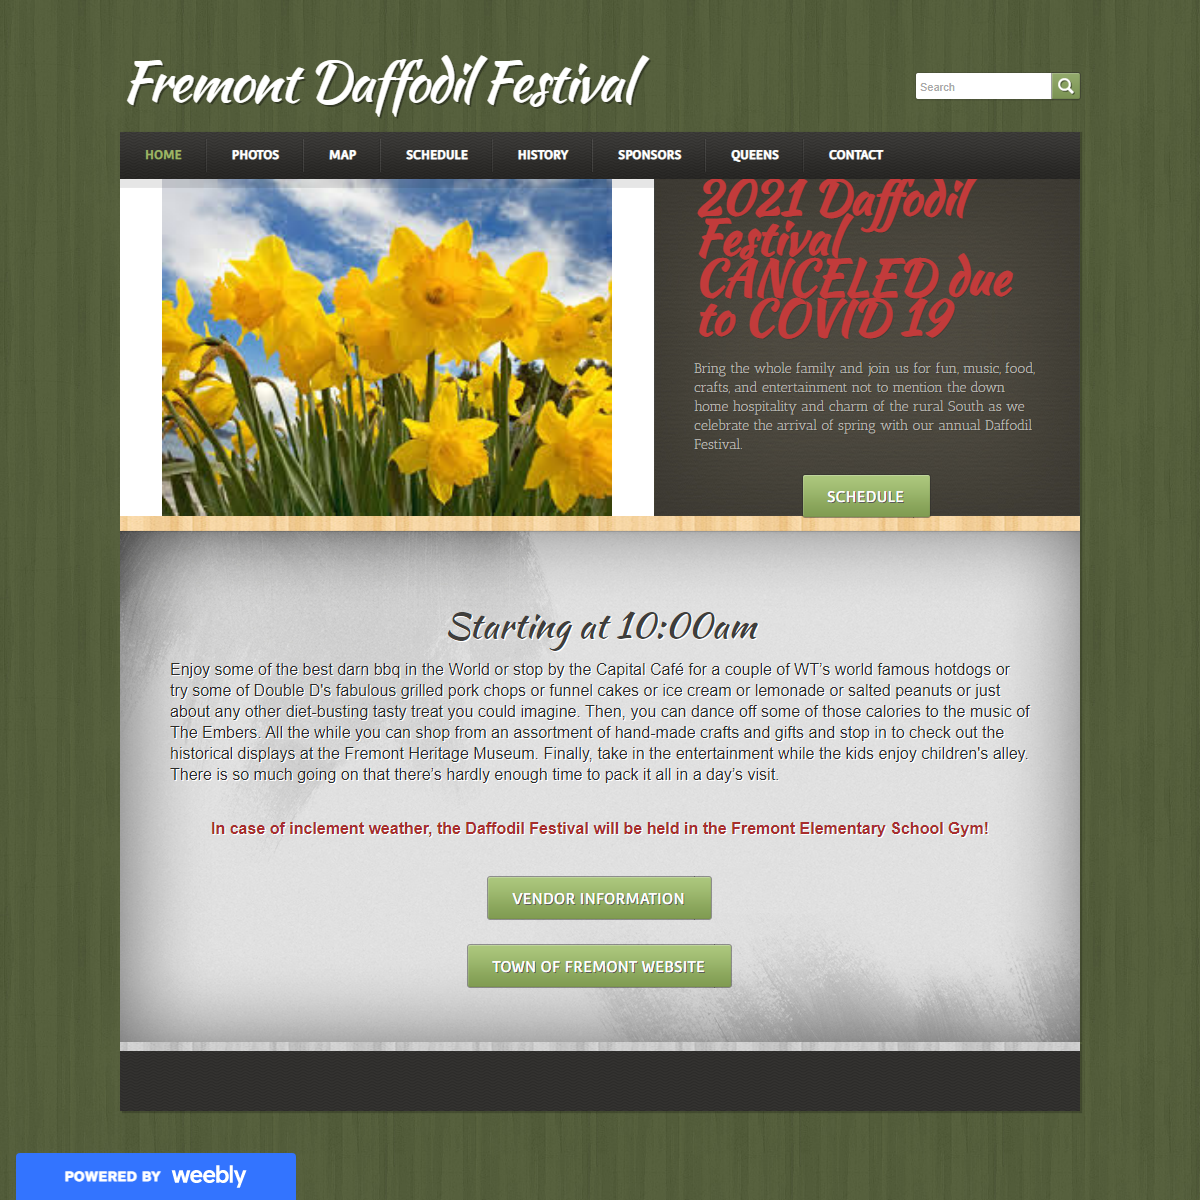 A complete backup of https://fremontdaffodilfestival.weebly.com/